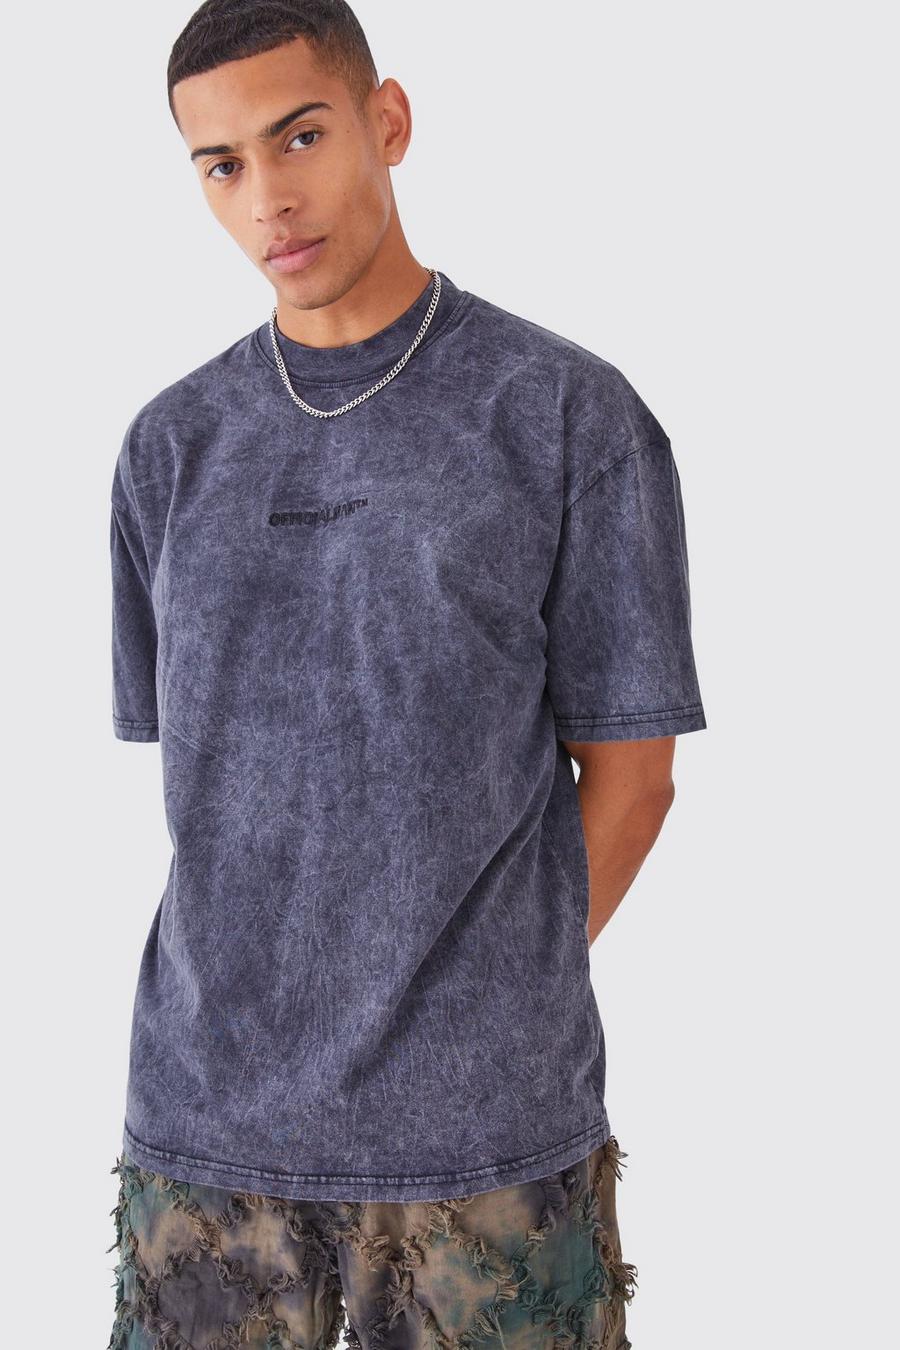 Charcoal grey Oversized Man Official Acid Wash T-shirt